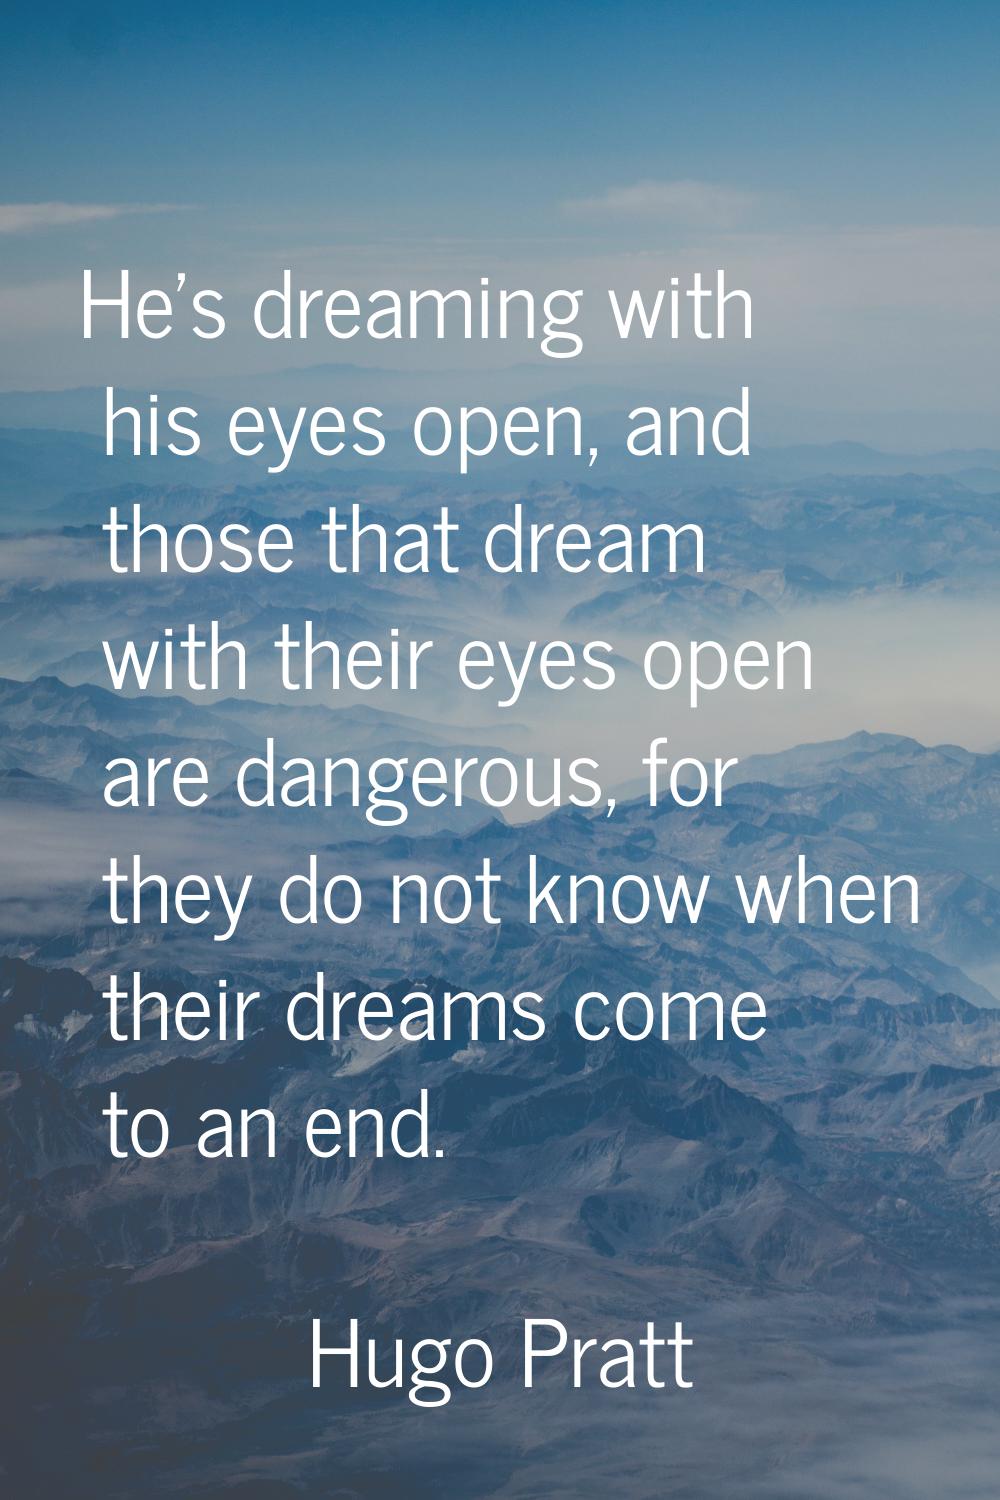 He's dreaming with his eyes open, and those that dream with their eyes open are dangerous, for they